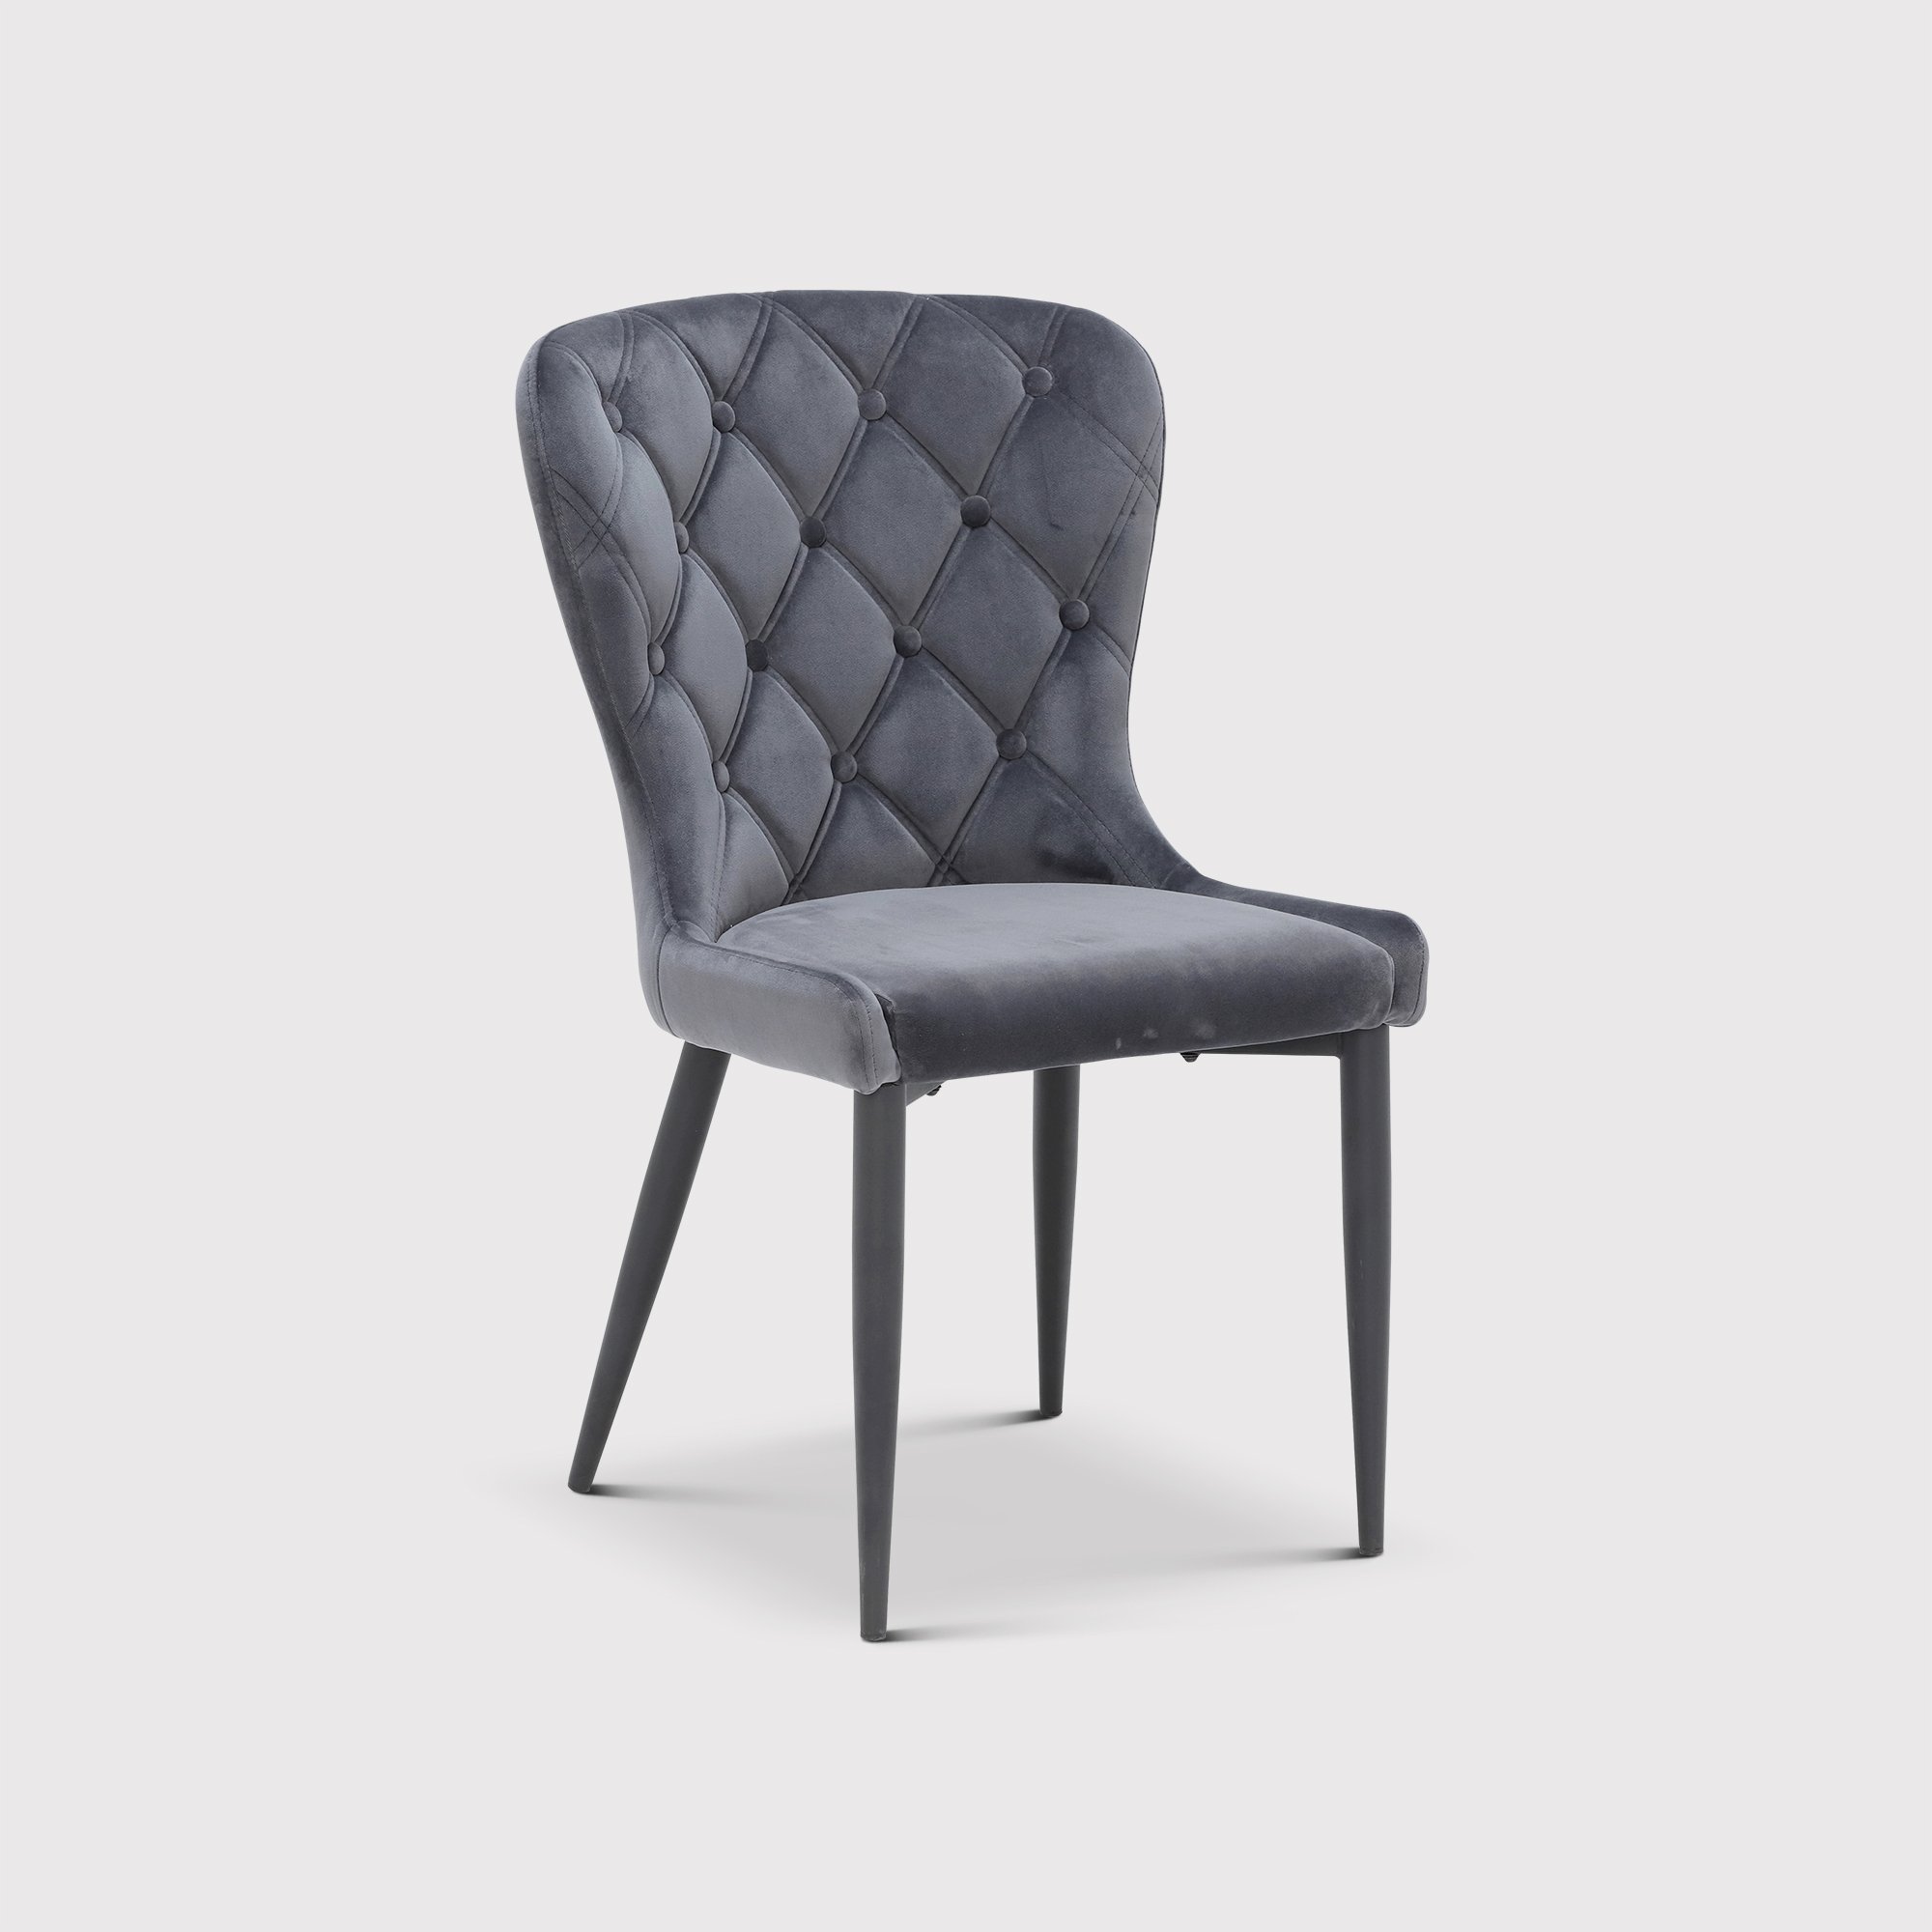 Burnaby Dining Chair, Grey | Barker & Stonehouse